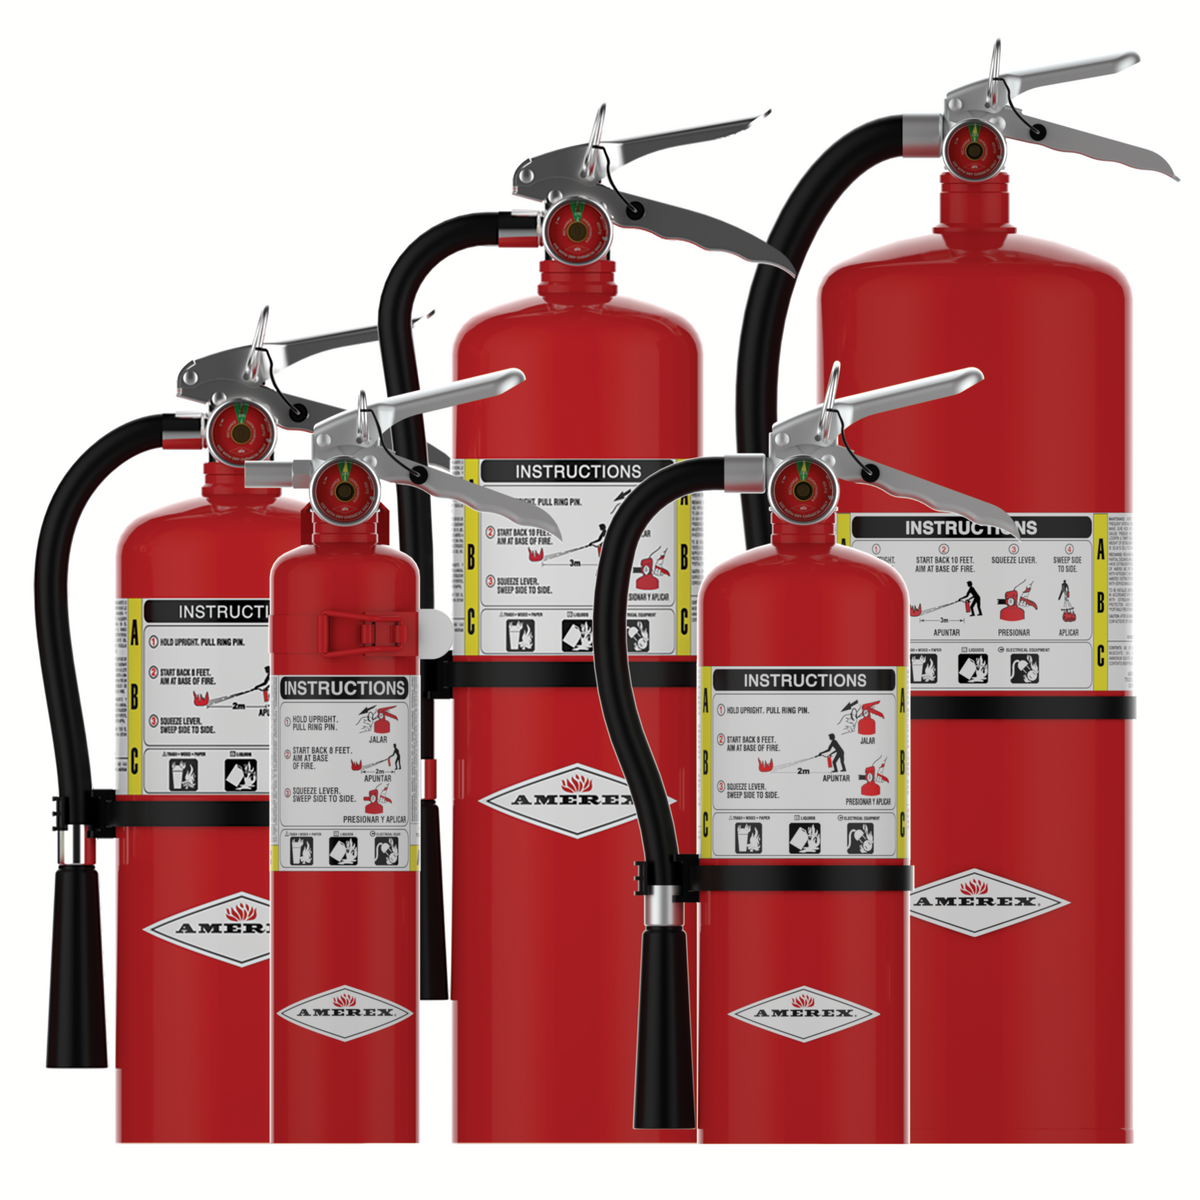 https://www.amerex-fire.com/upl/downloads/catalog/products/fire/abc.png